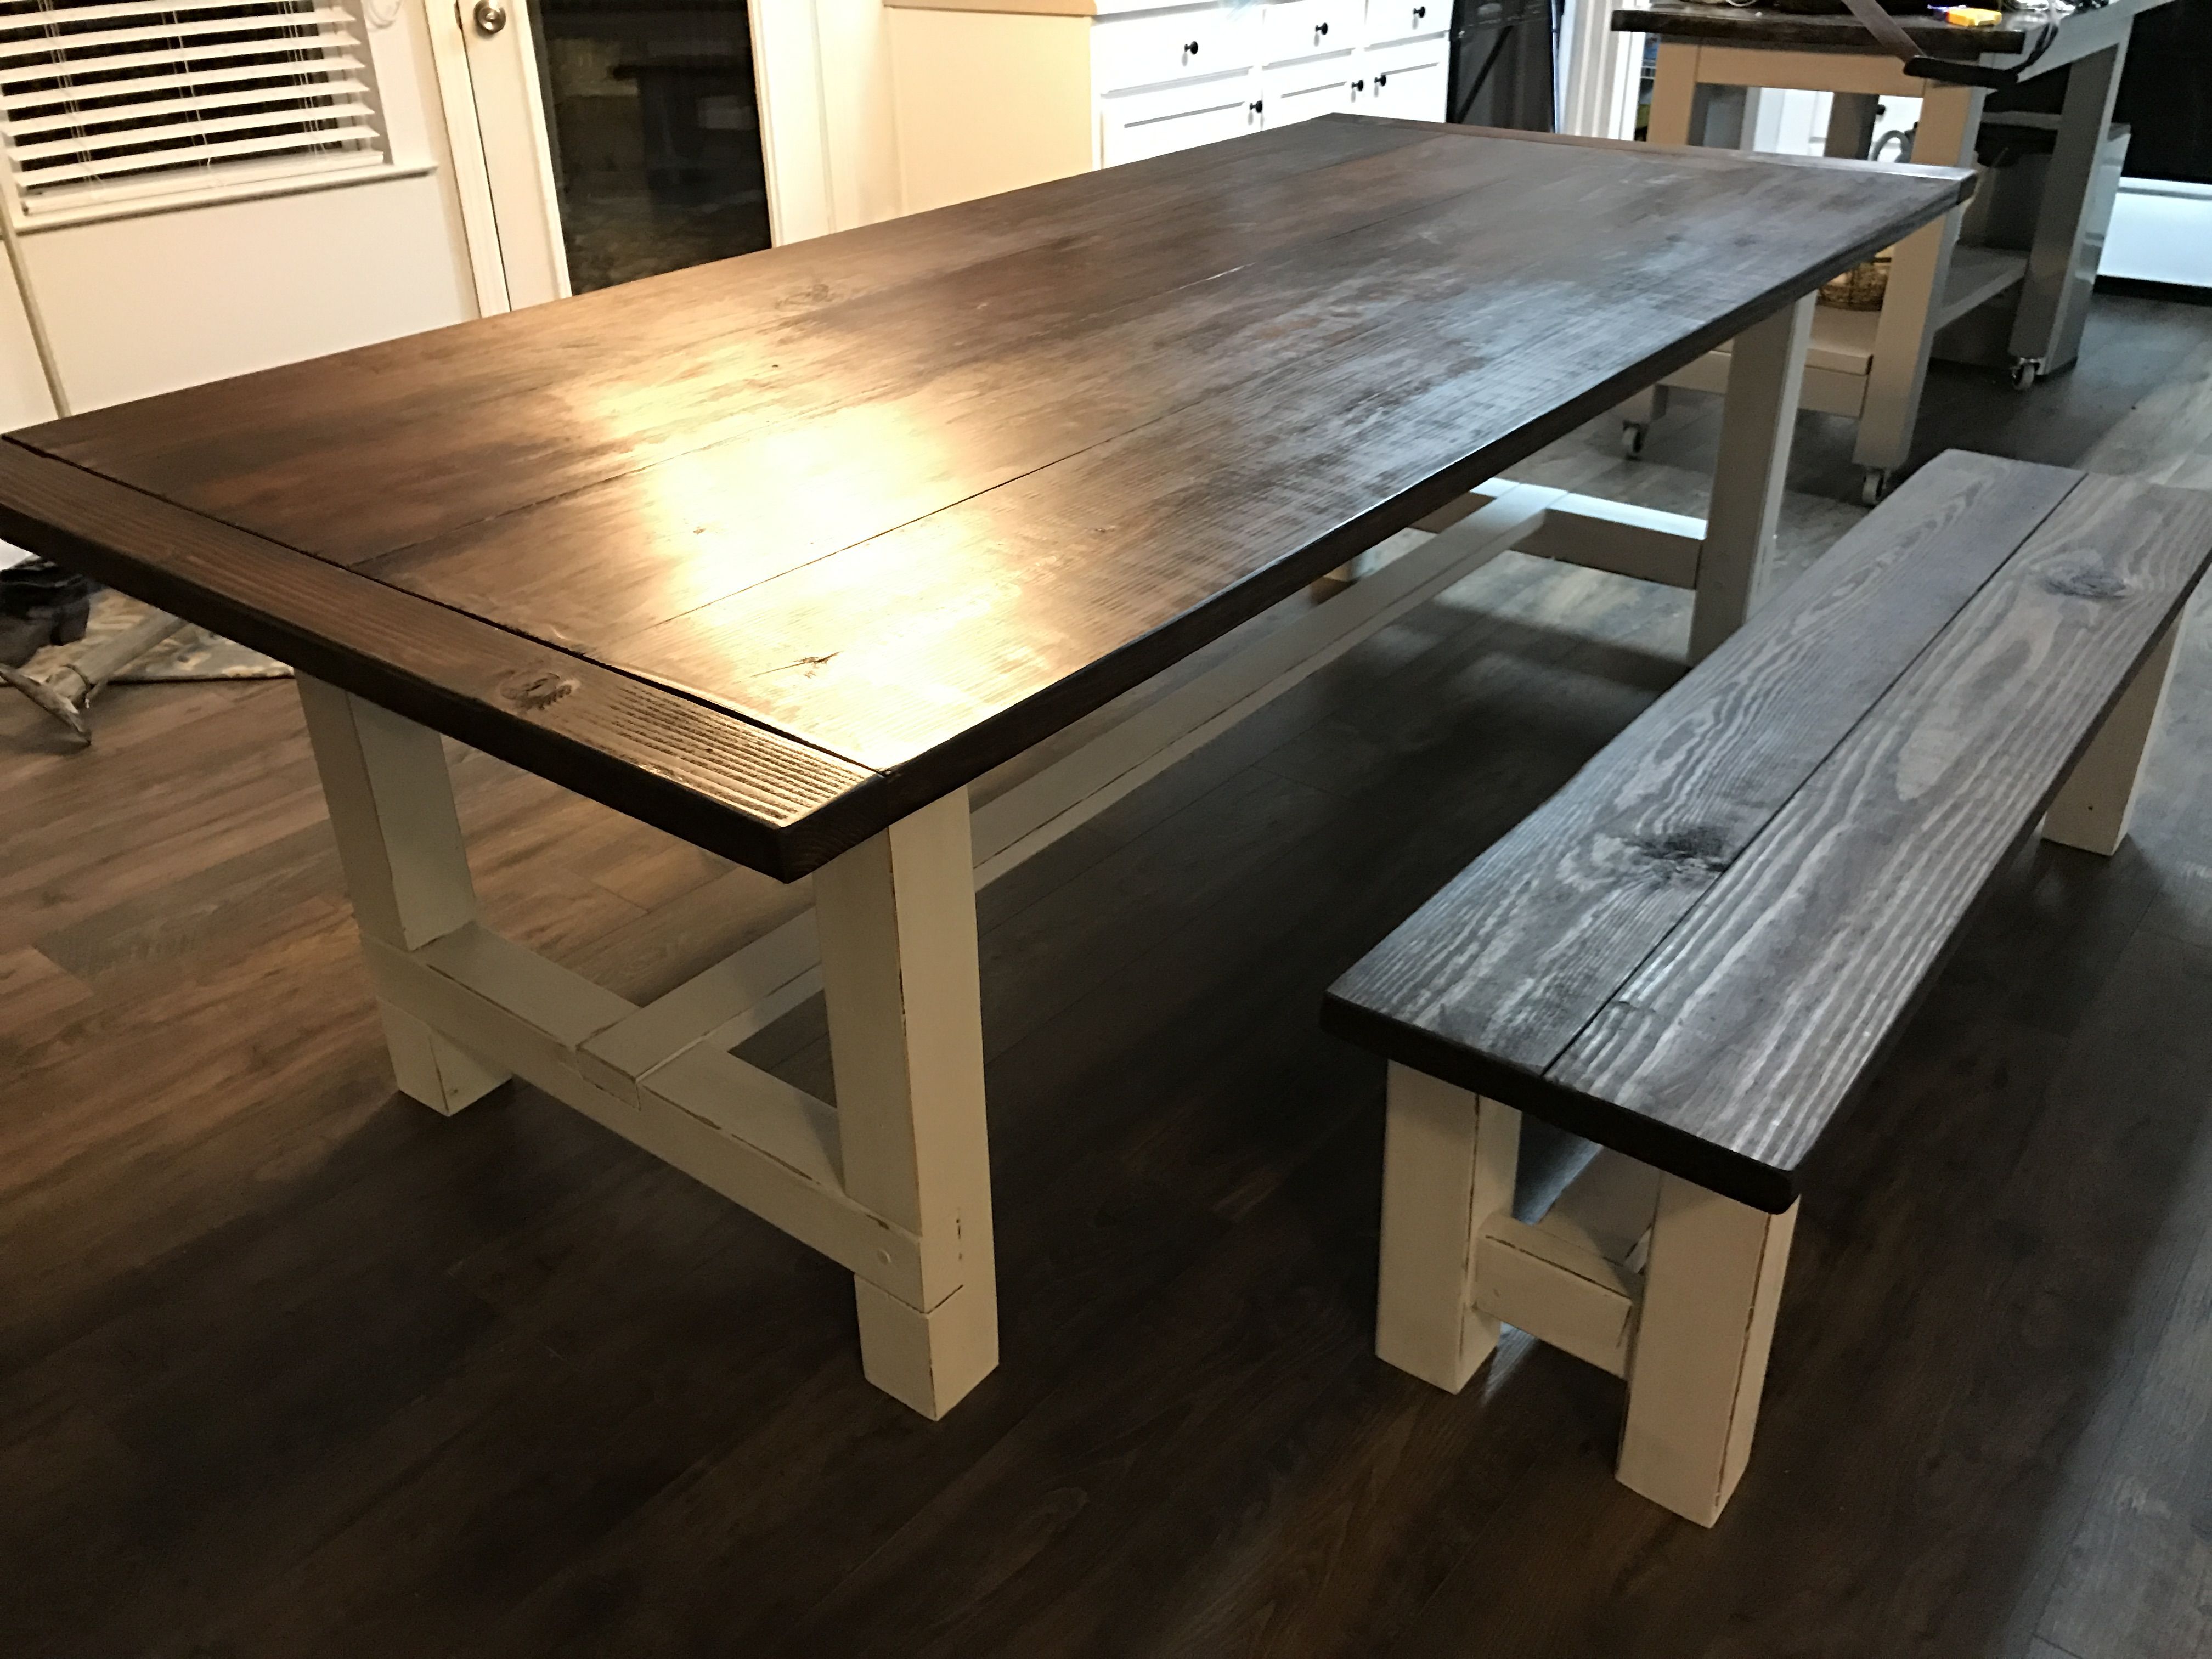 Teak Dining Table With Bench: A Rustic Touch To Your Dining Room